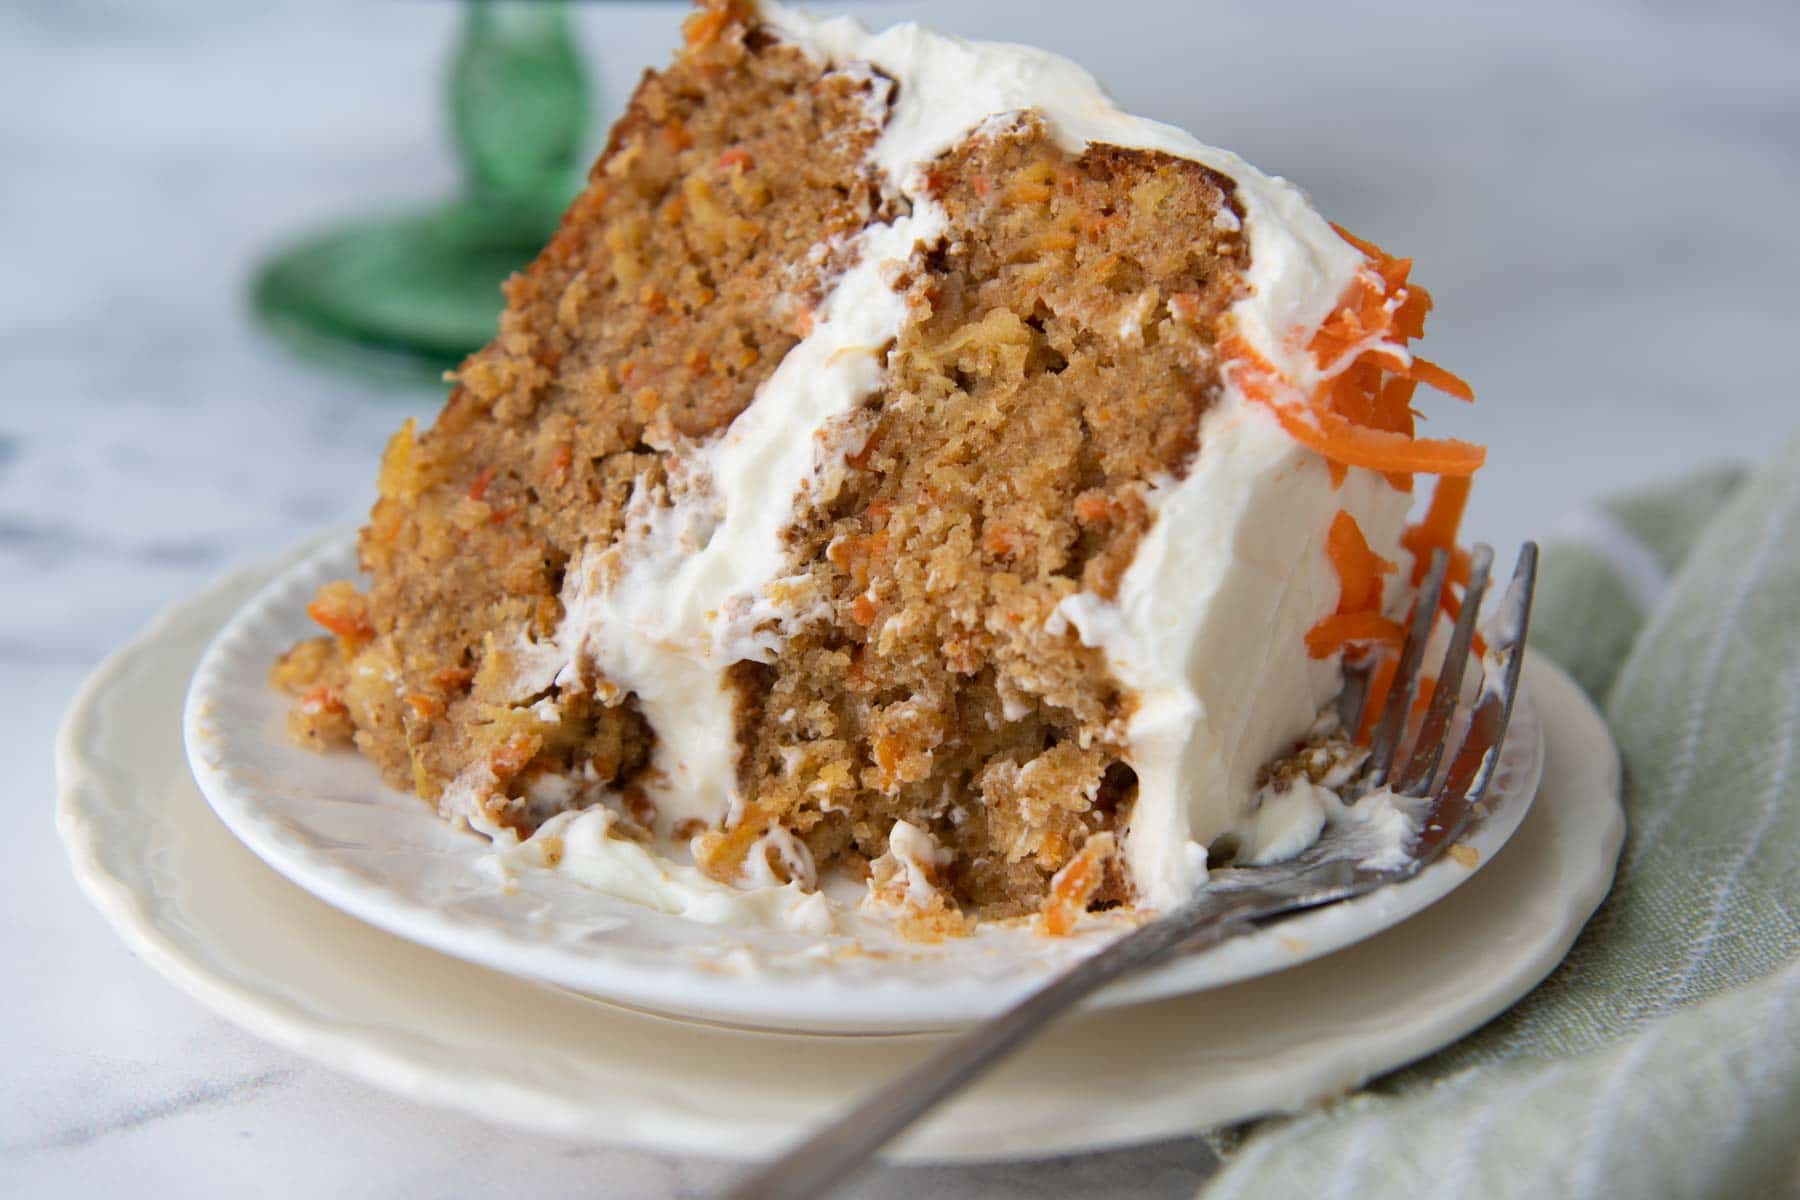 a slice of carrot cake on a white plate with a bite taken out